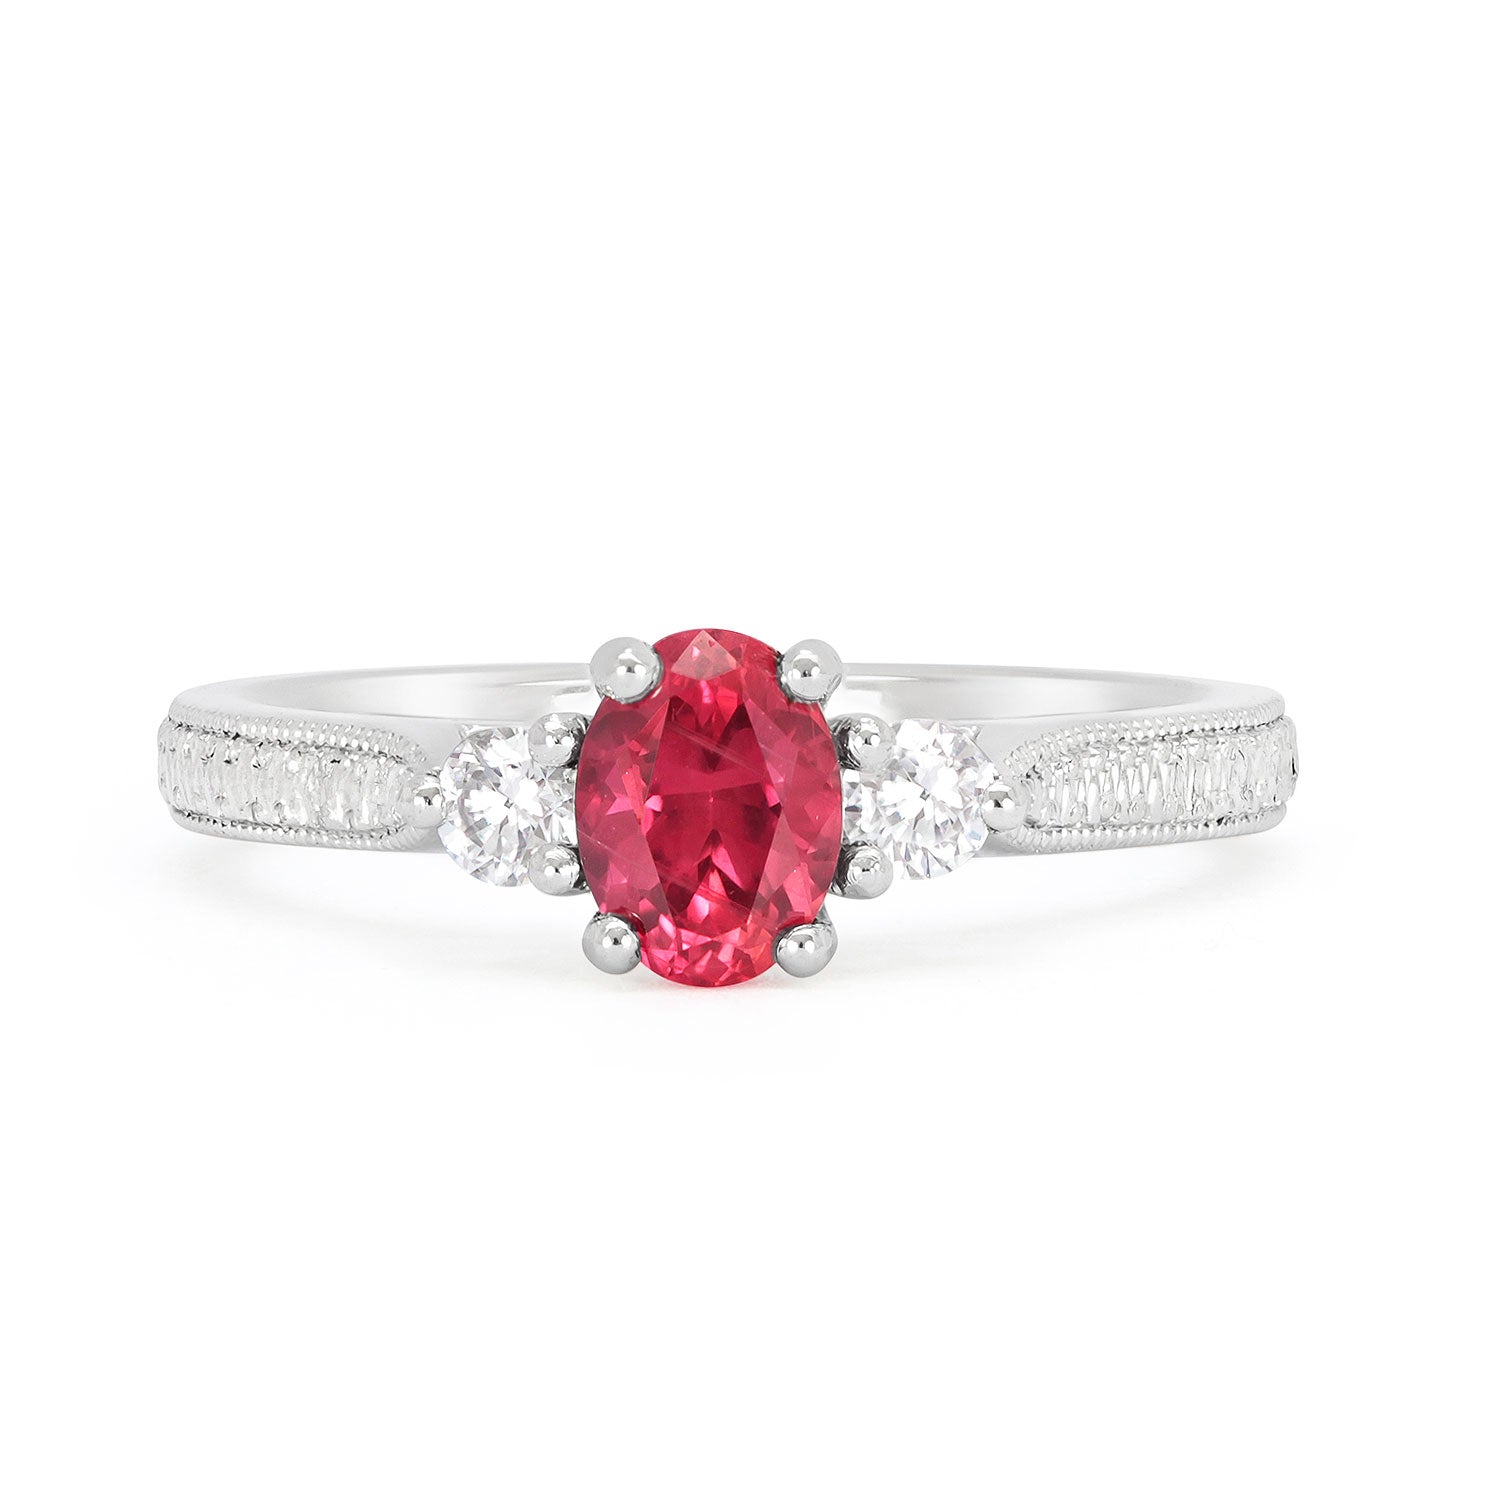 Bespoke Hannah ethical engagement ring, cast in recycled platinum and set with a 0.55ct oval cut Malawi ruby and traceable Canadian diamonds